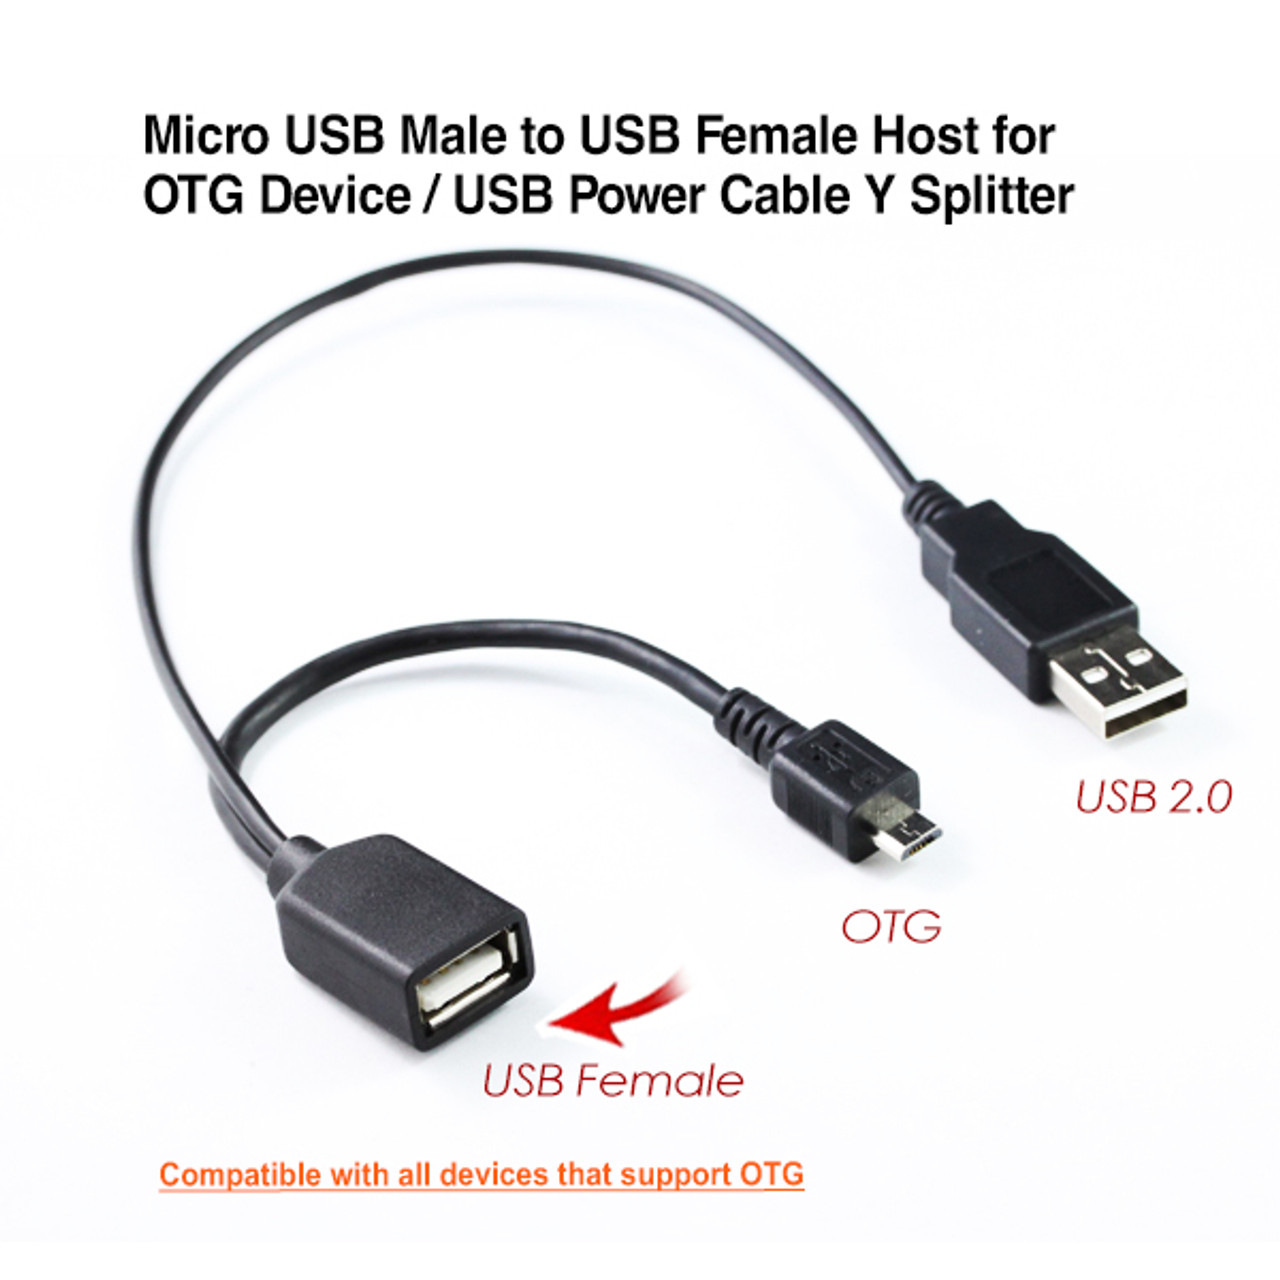 StarTech.com 8in USB OTG Cable - Micro USB to Mini USB - M/M - USB OTG  Mobile Device Adapter Cable - 8 inch (UMUSBOTG8IN),Black